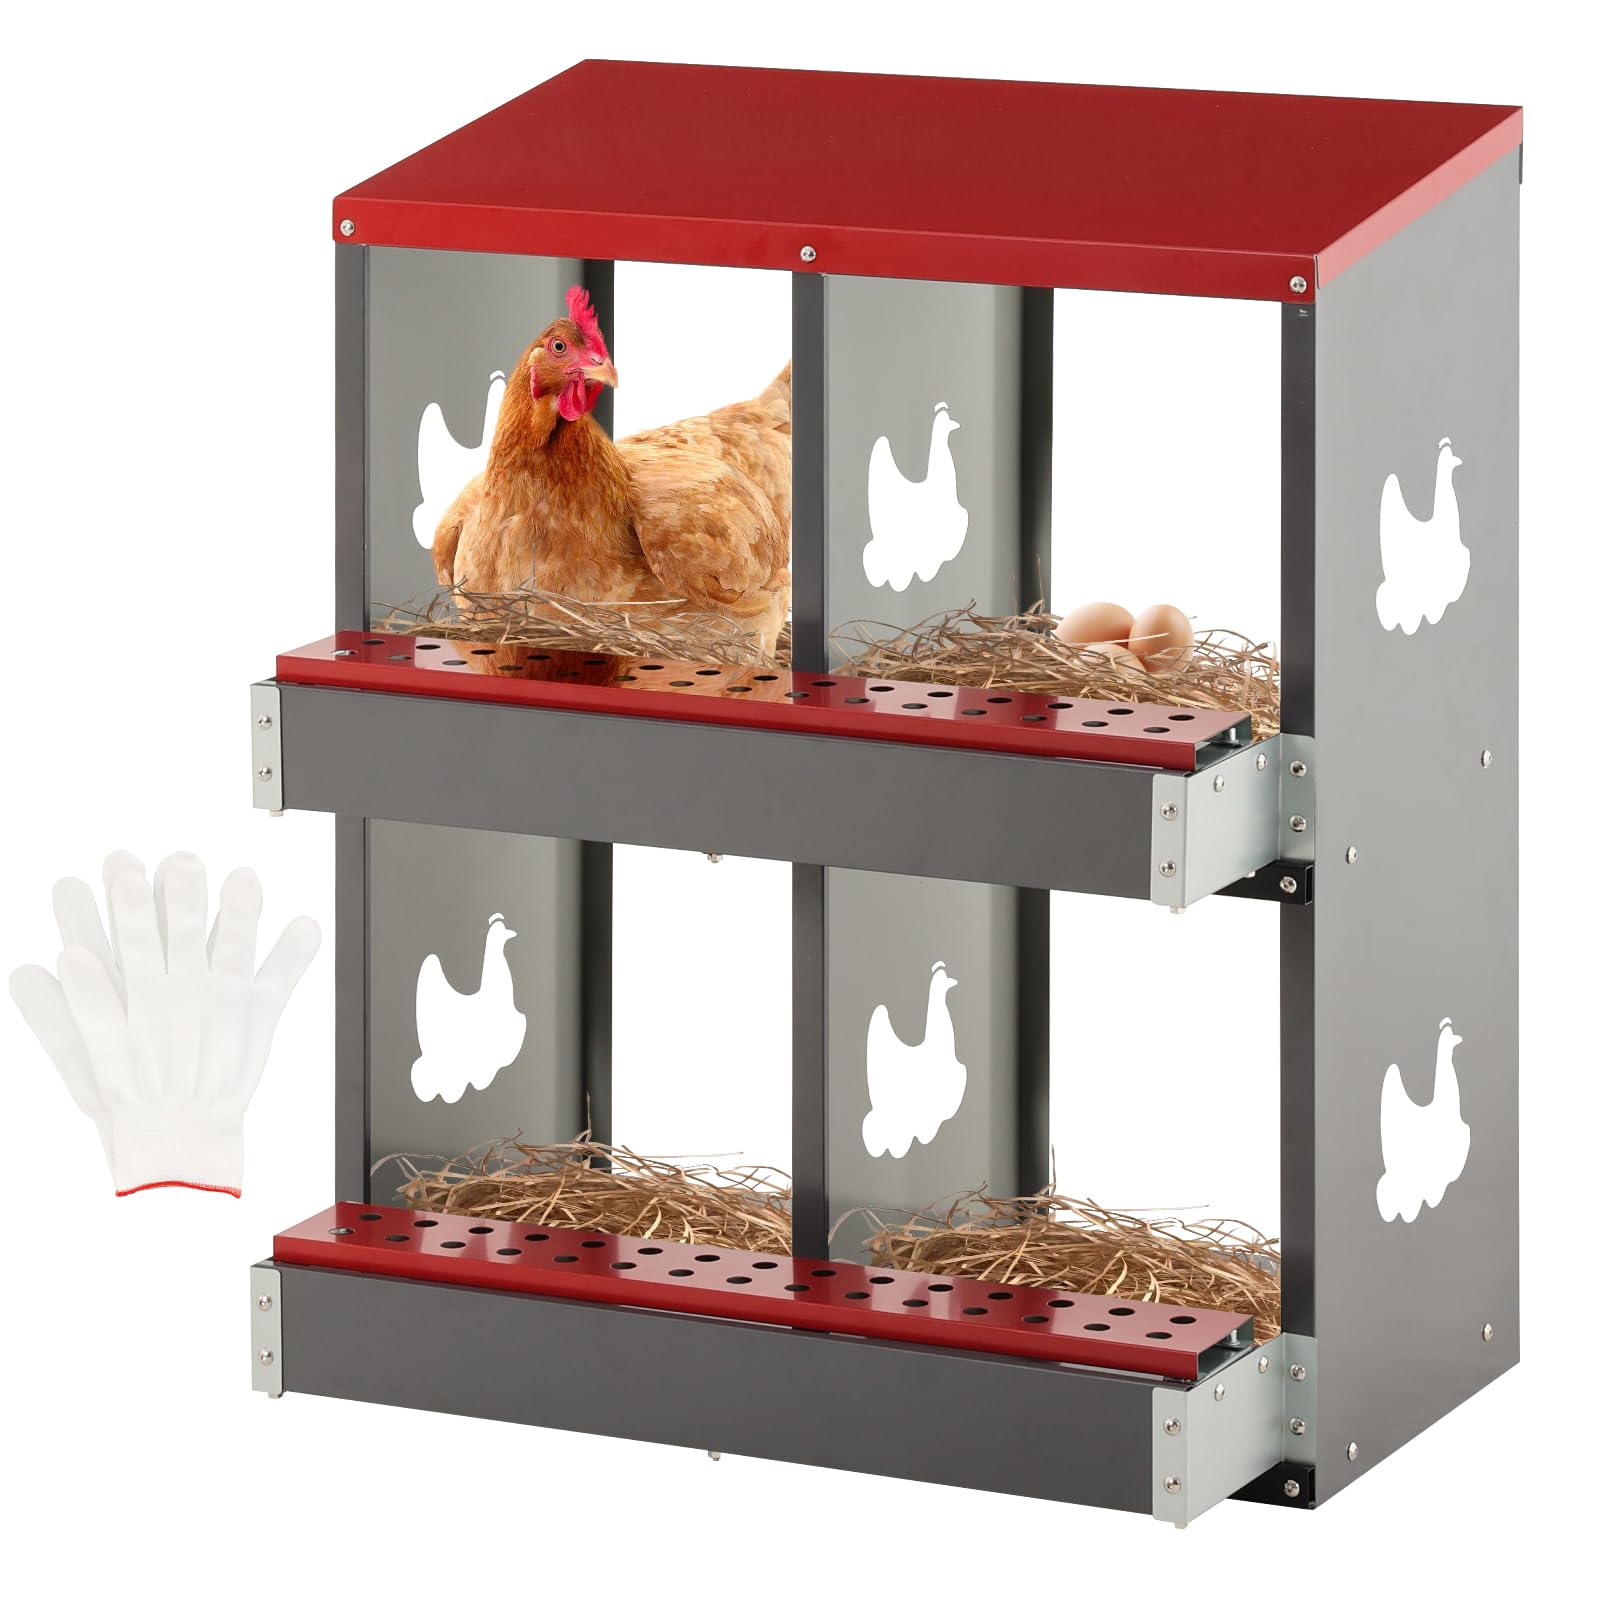 LUCKUP Chicken Nesting Box for Laying Eggs, 4 Holes Roll Out Laying Box for Hens, Metal Chicken Nest Boxes with Perch to Protect Eggs, Wall Mount Poultry Nesting Boxes for Coop, Red